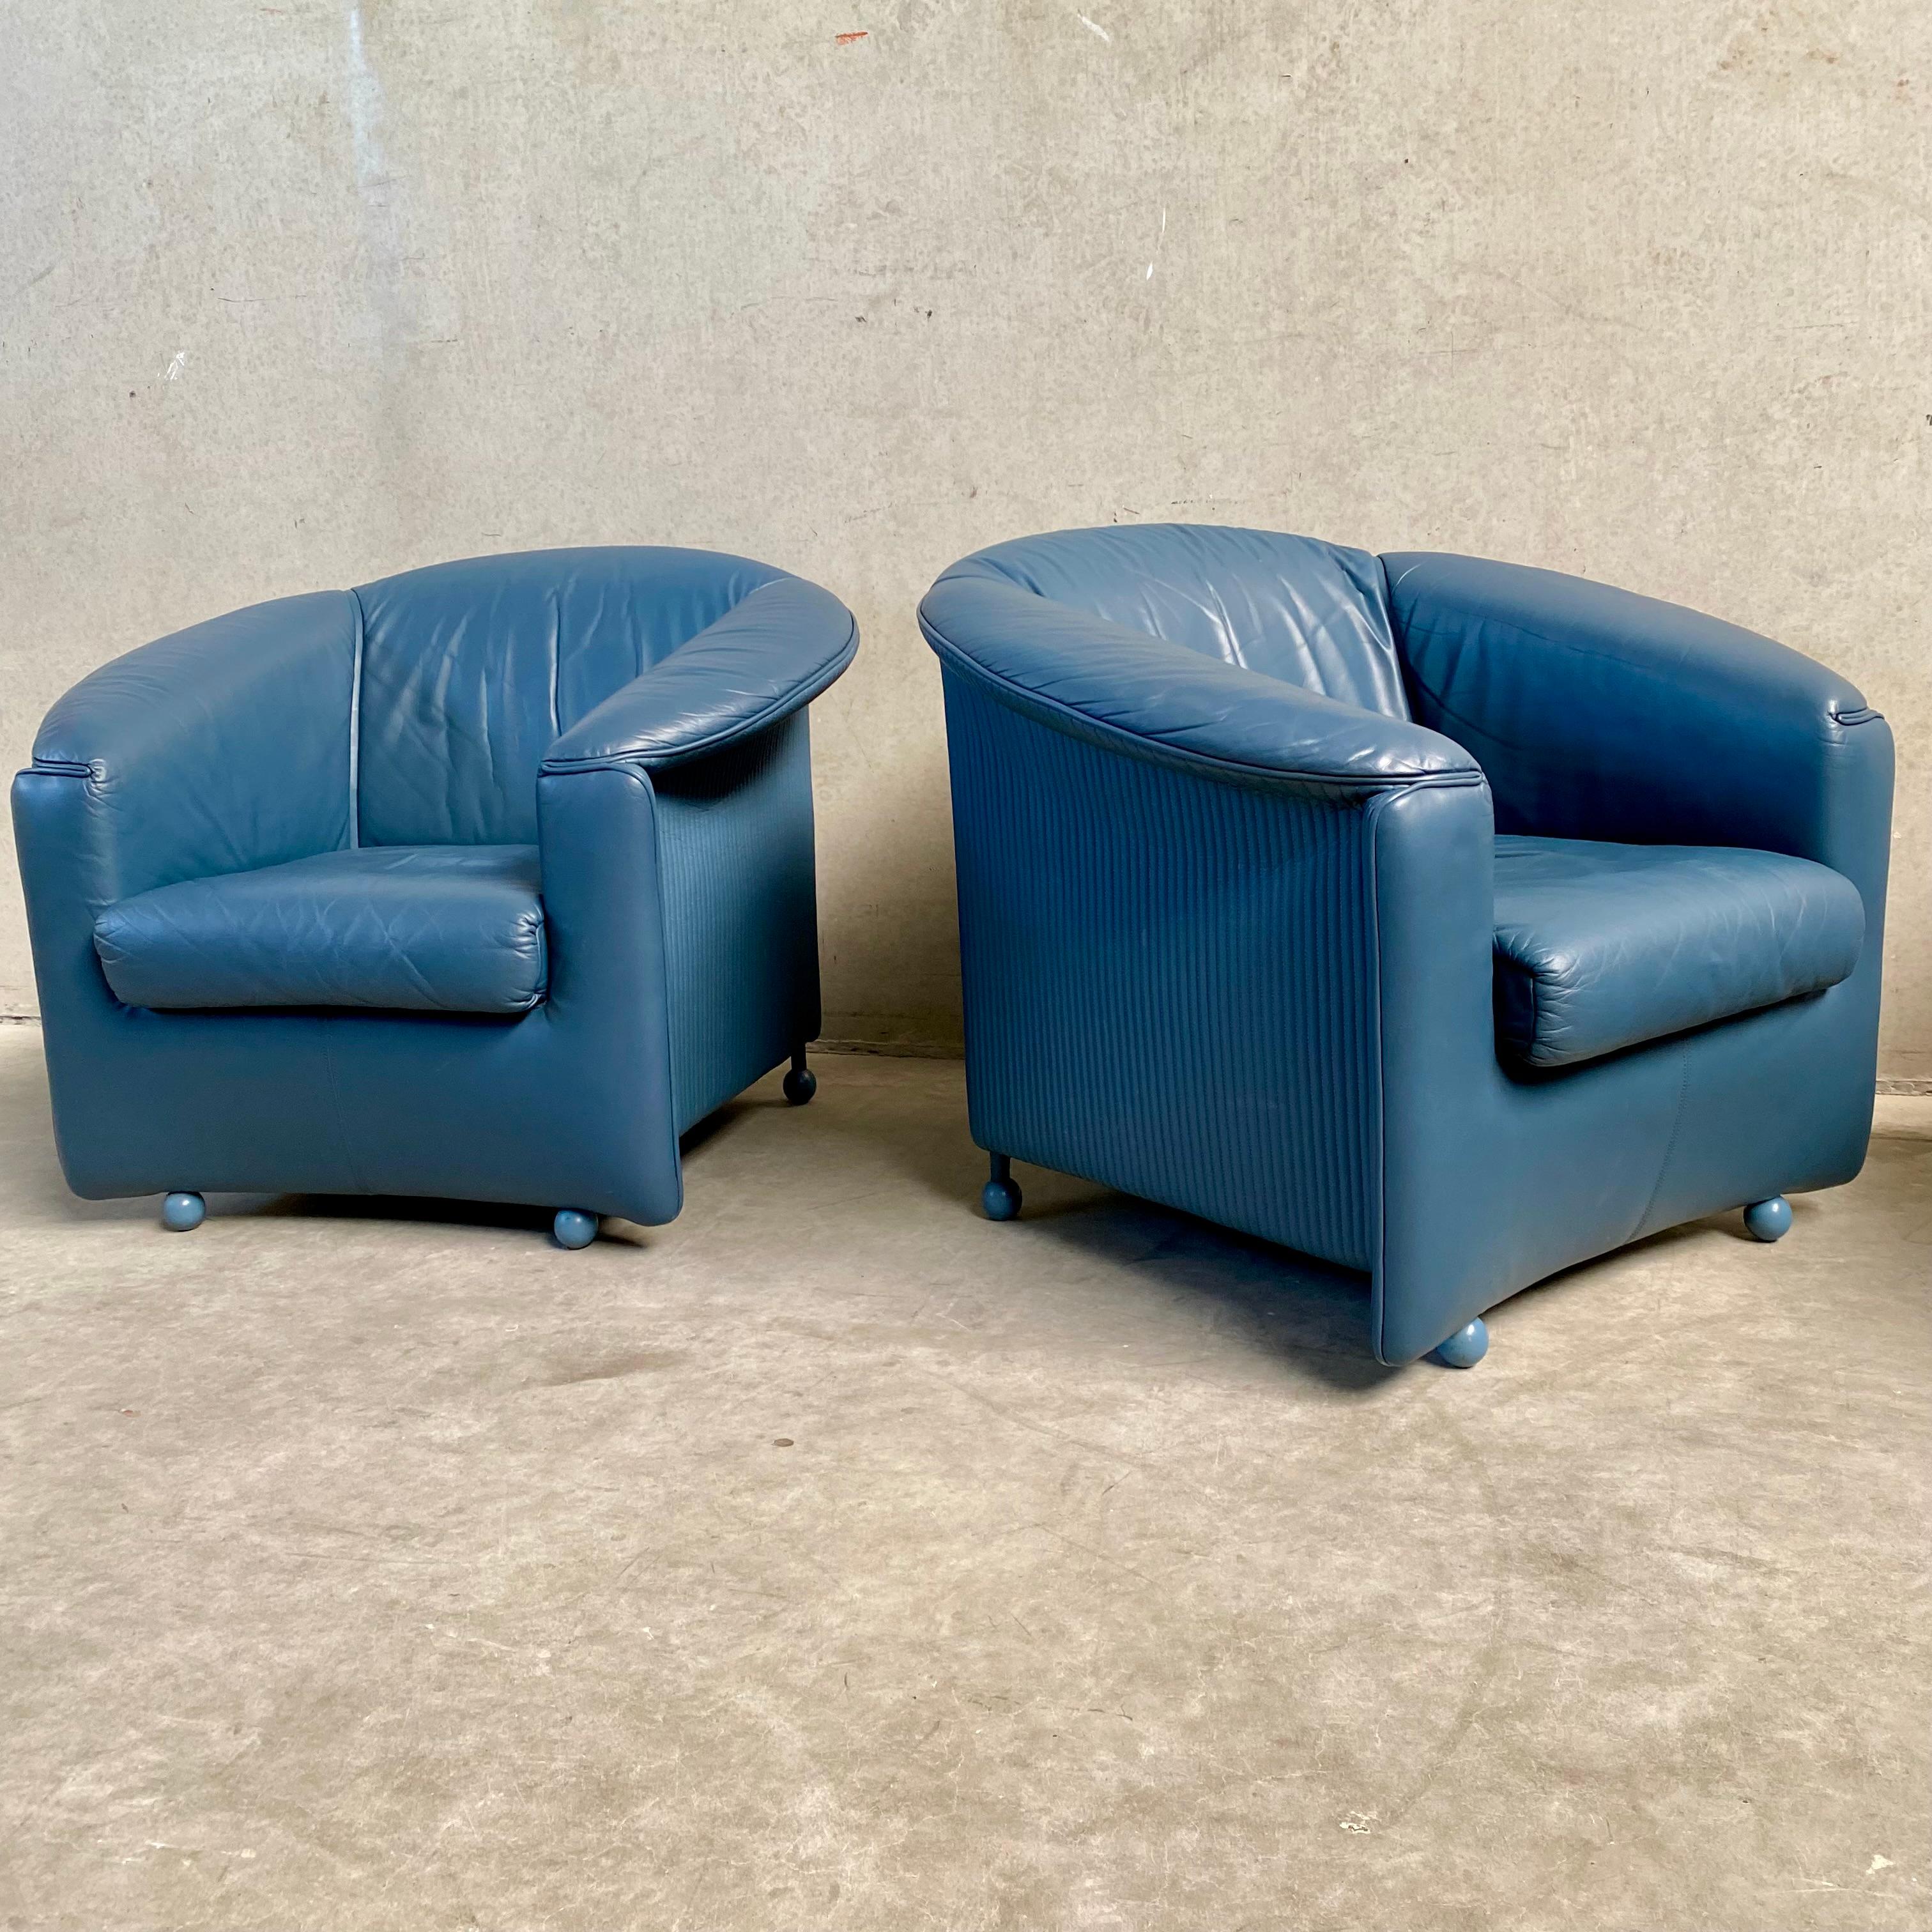 Set of 2 Vintage Leather Arm Chairs by Paolo Piva for Wittmann, Austria 1980s For Sale 5